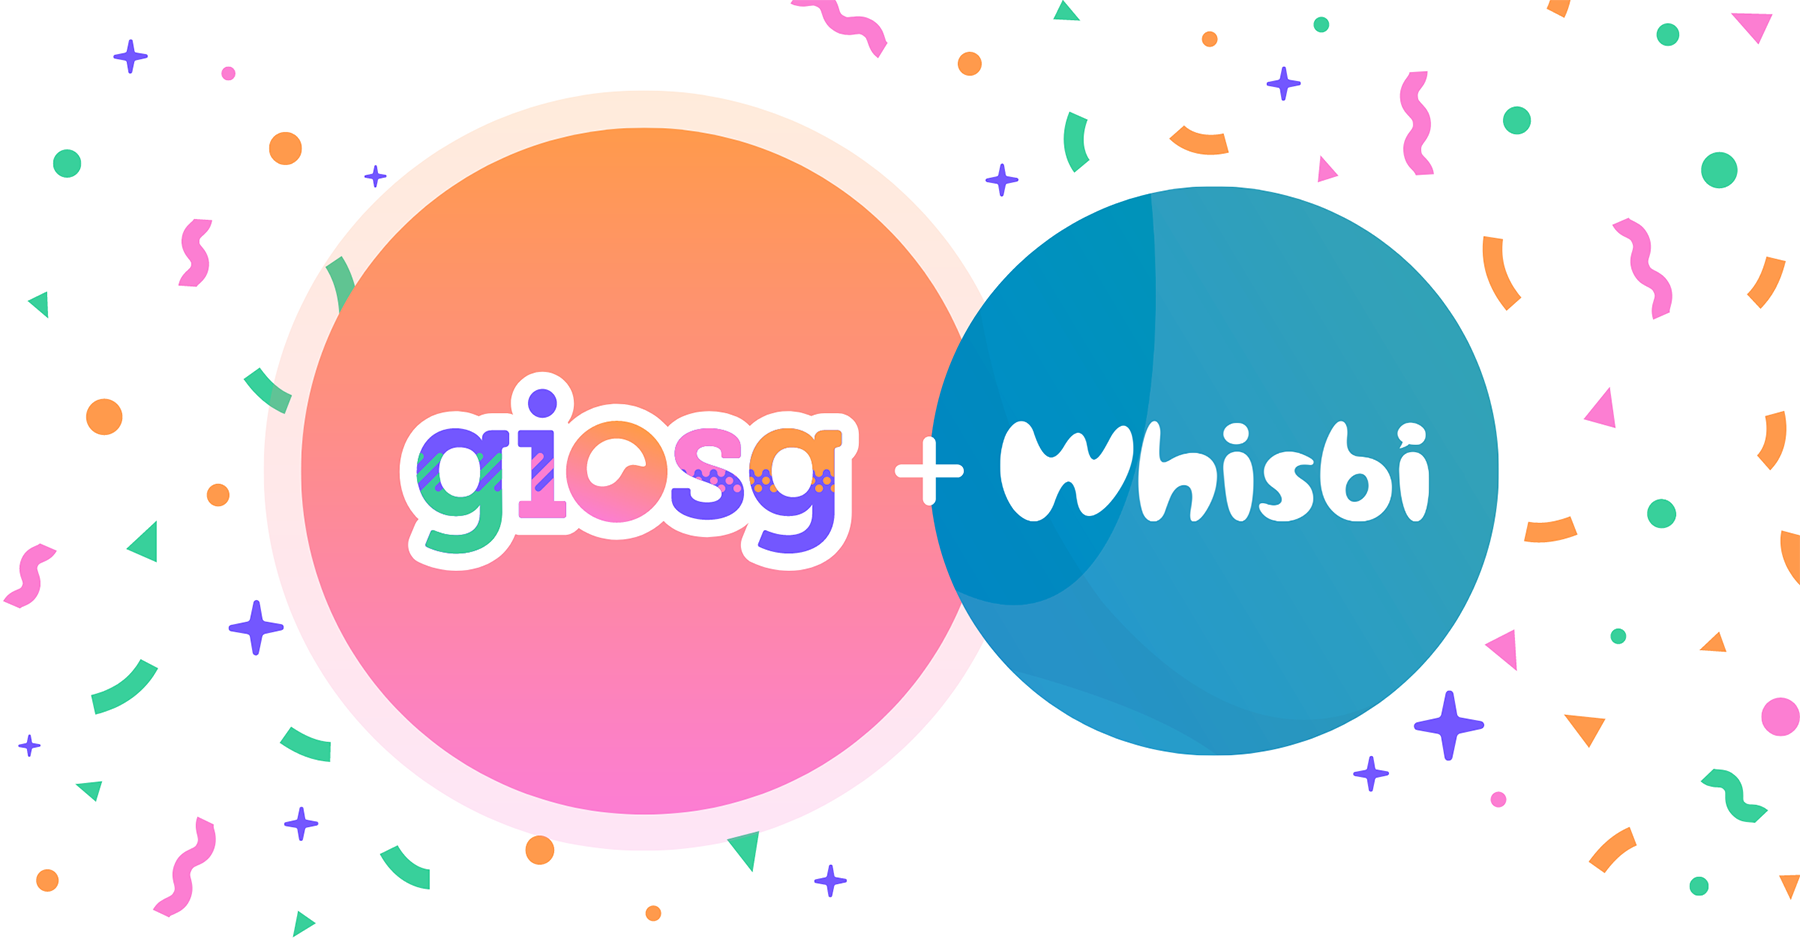 Giosg Sets for New Strategic Step for Continued Growth – Acquires Whisbi, Spain’s Leading SaaS Provider within Live Shopping